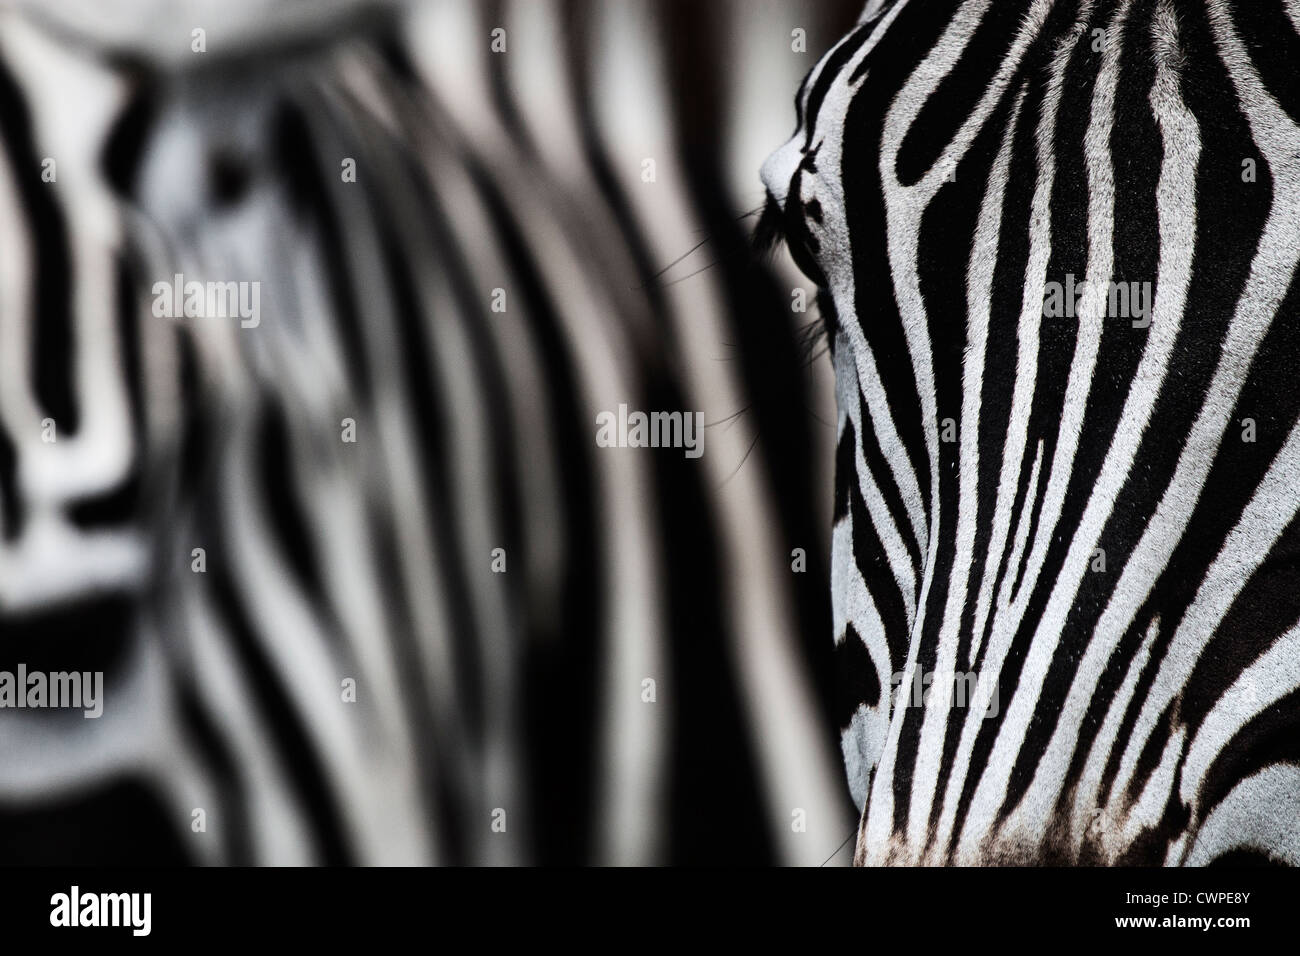 Close up shot of a zebra's face, with a herd-mate carrying the striped theme into the background. Stock Photo